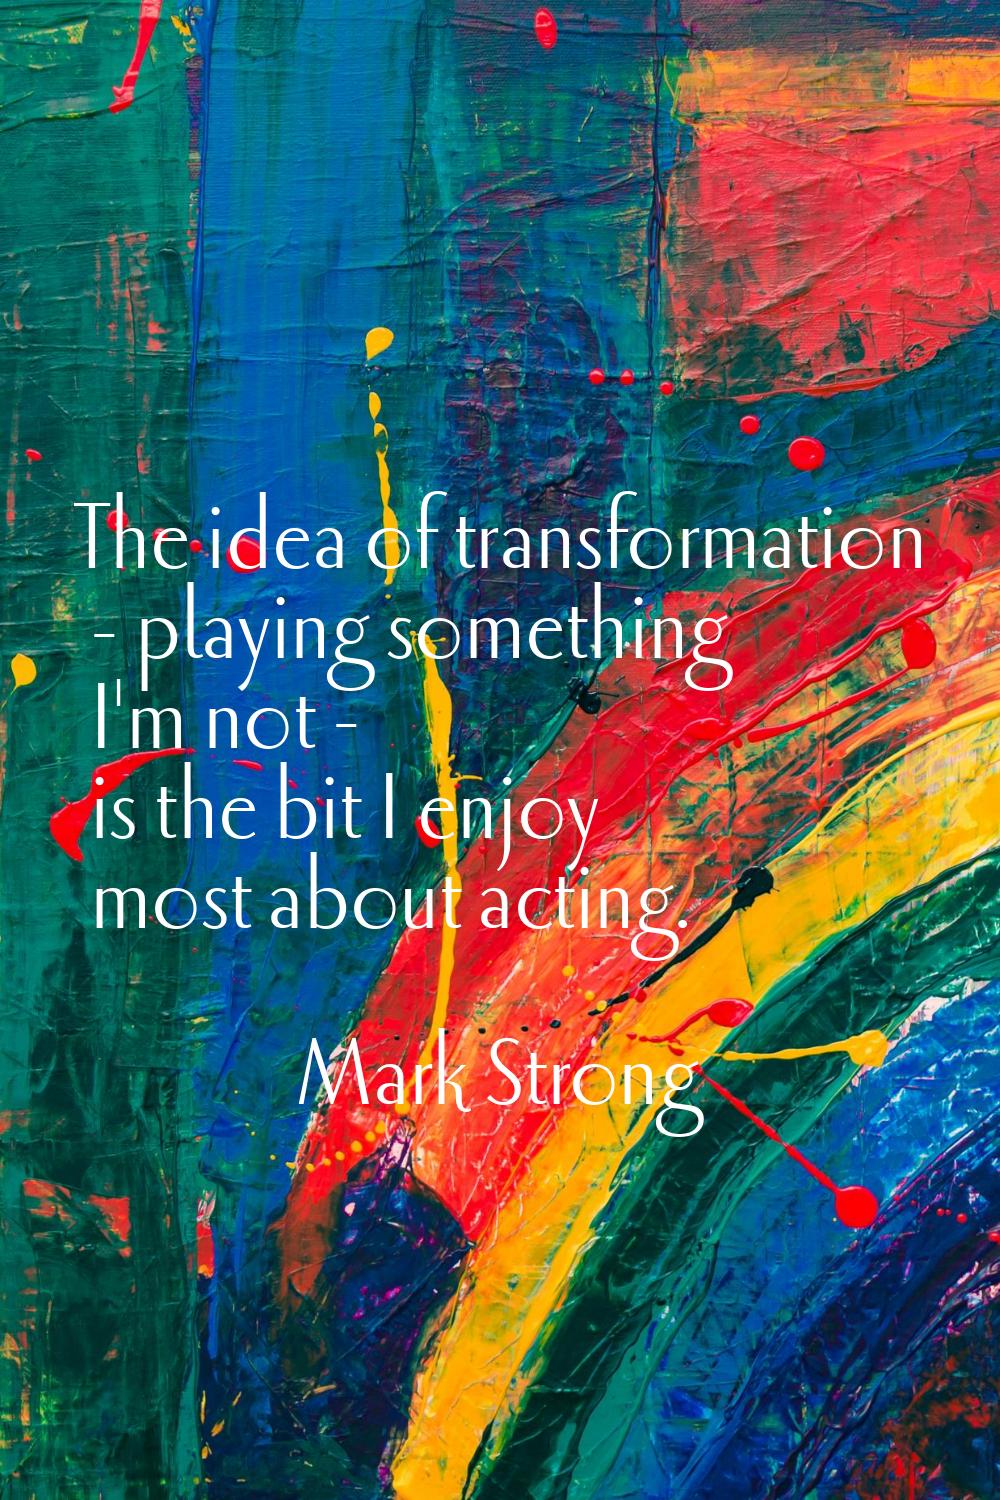 The idea of transformation - playing something I'm not - is the bit I enjoy most about acting.